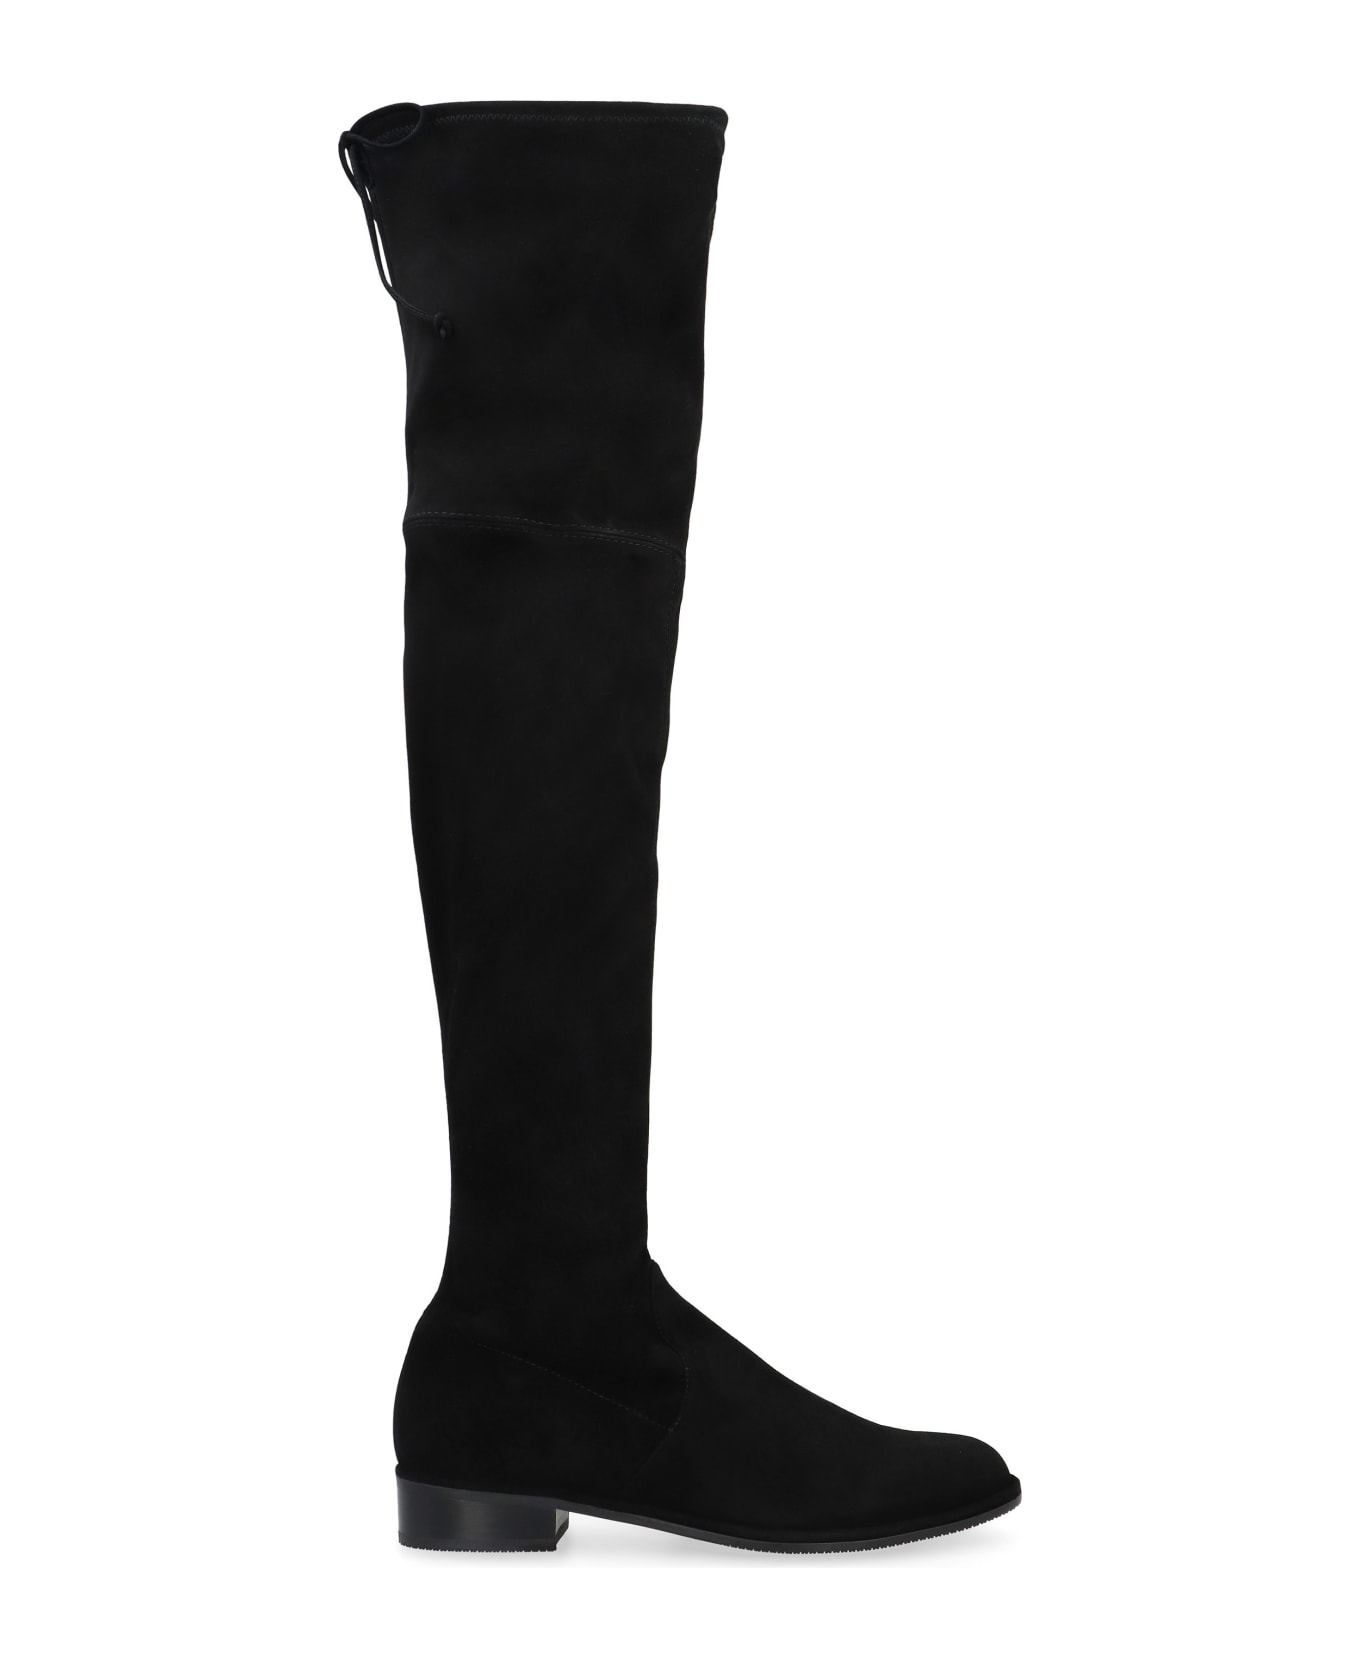 Stuart Weitzman Lowland Stretch Suede Over The Knee Boots - black ブーツ